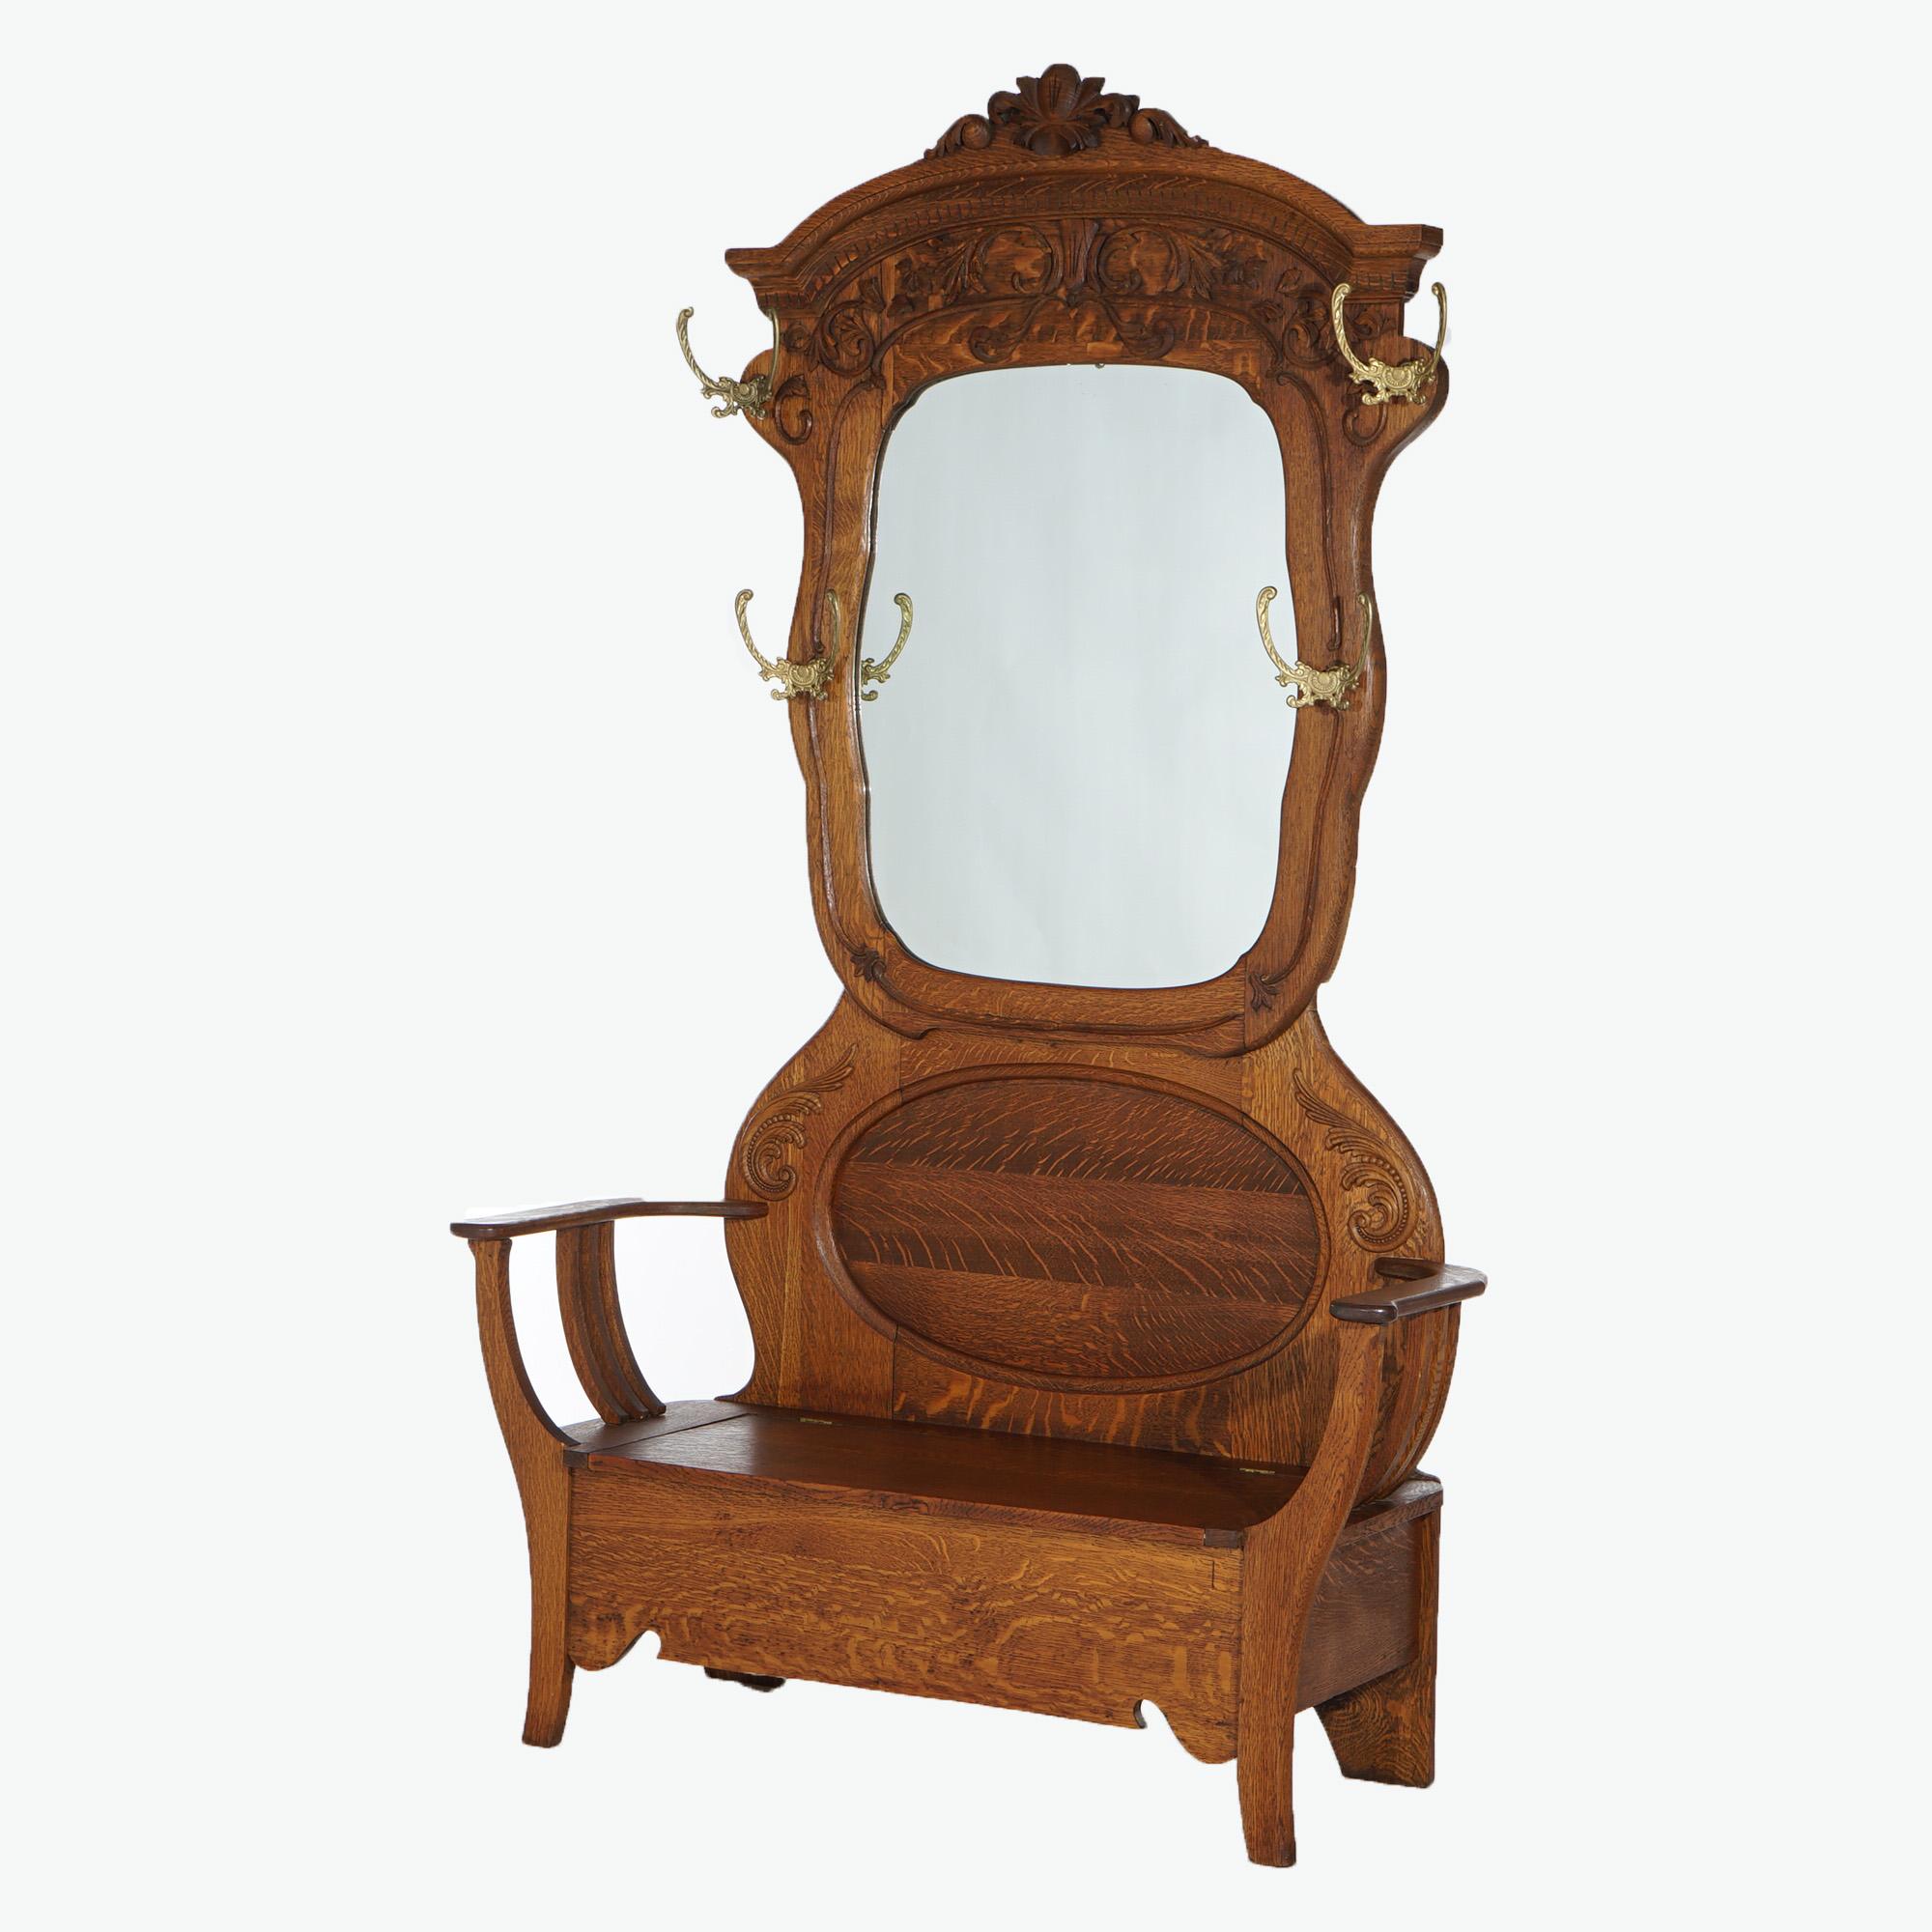 American Antique Oversized R J Horner Carved Oak & Mirrored Hall Seat circa 1900